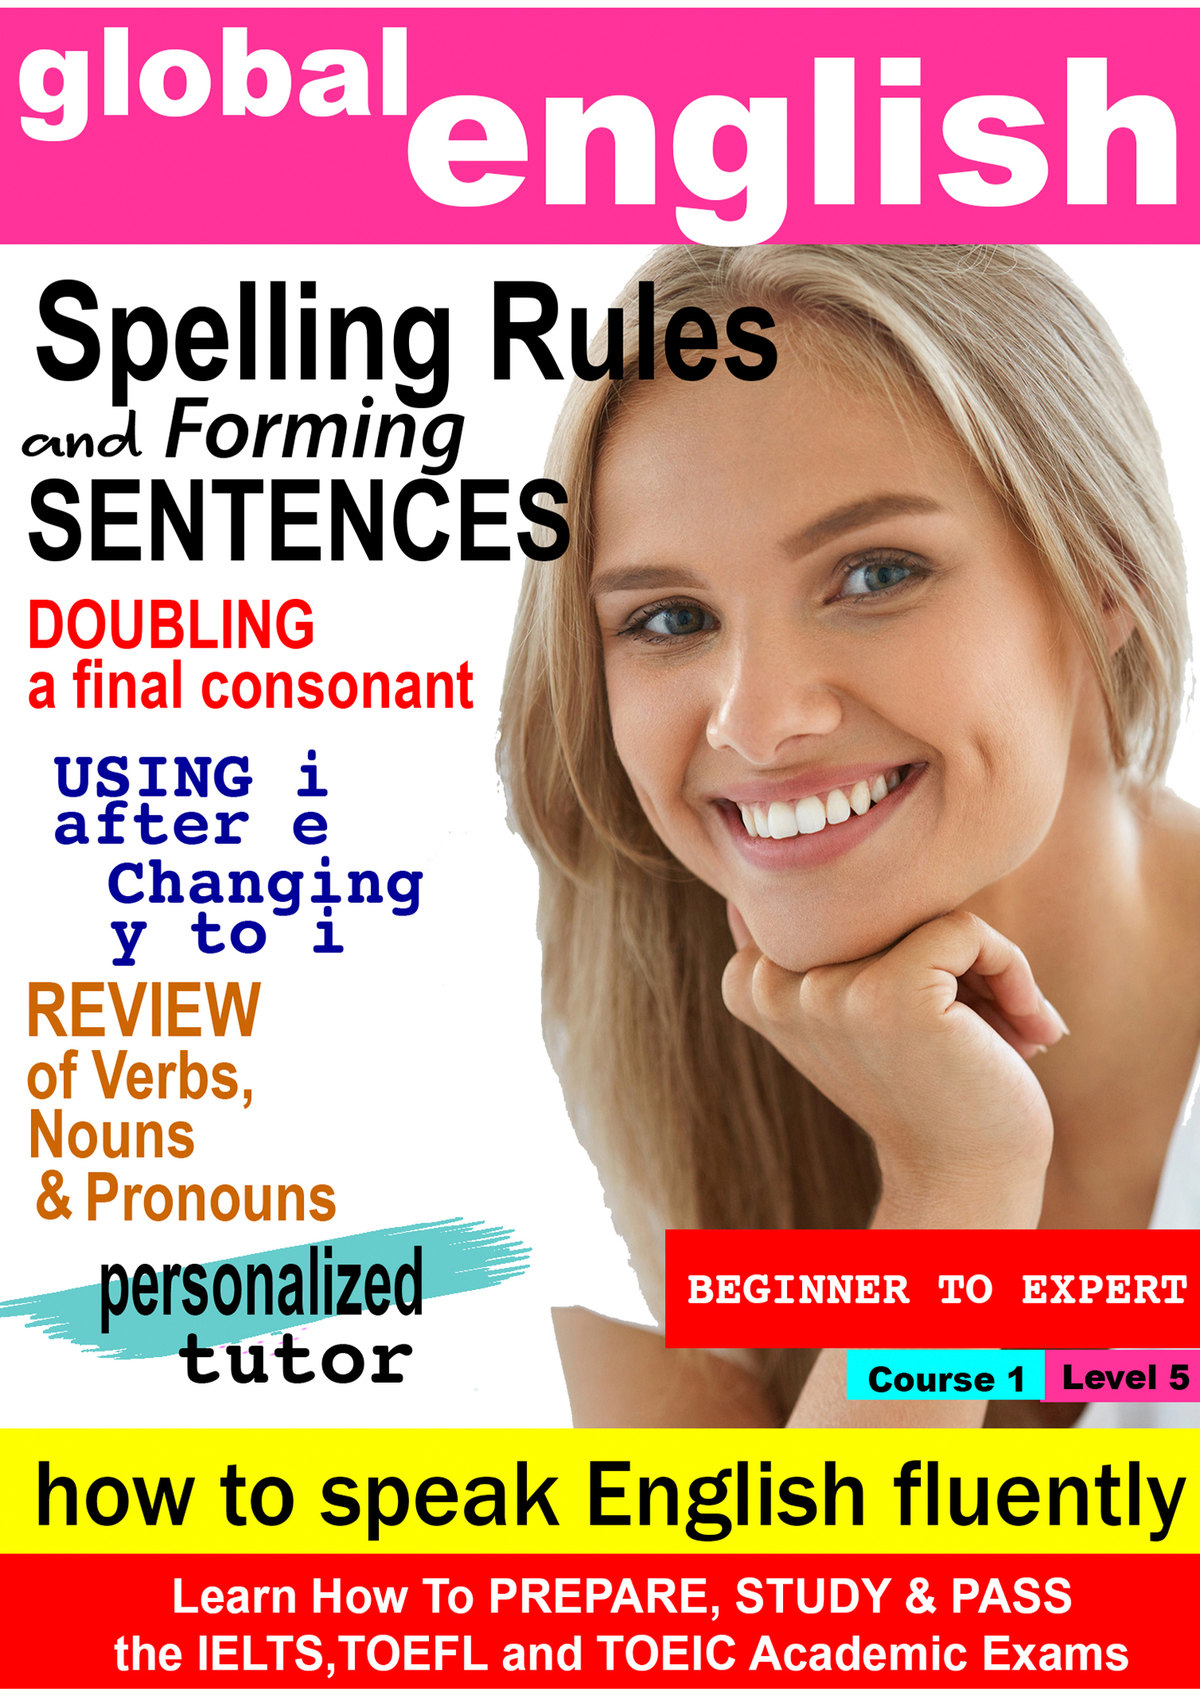 Spelling Rules Review Of Verbs Nouns Pronouns Upper lower Case Identifiers Present Simple